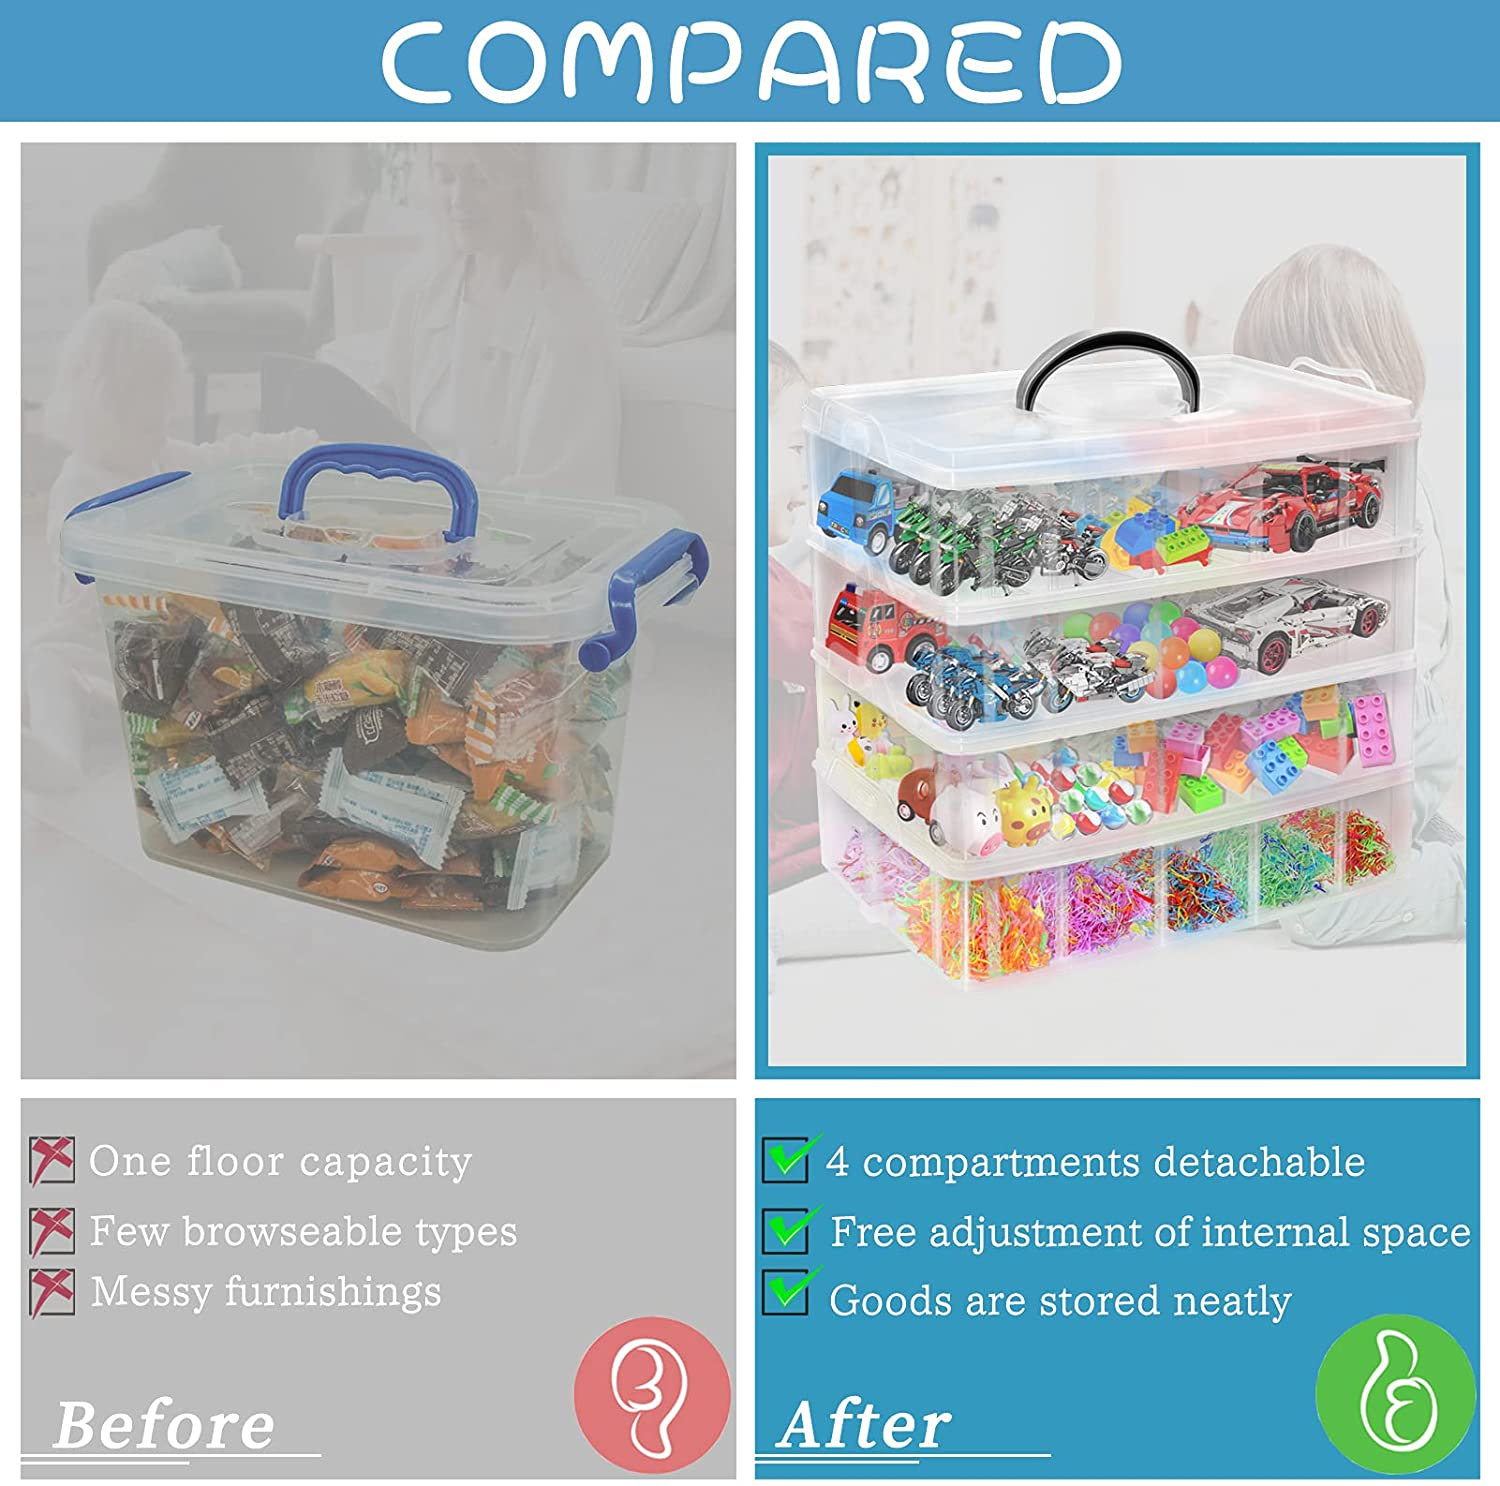 4-Tier Stackable Storage Container Box with 40 Adjustable Compartments, YOCOMEY Plastic Organizer Box Transparent Storage Case for Kids Toys, Art Crafts, Jewelry, Supplies, Fuse Beads, Washi Tapes